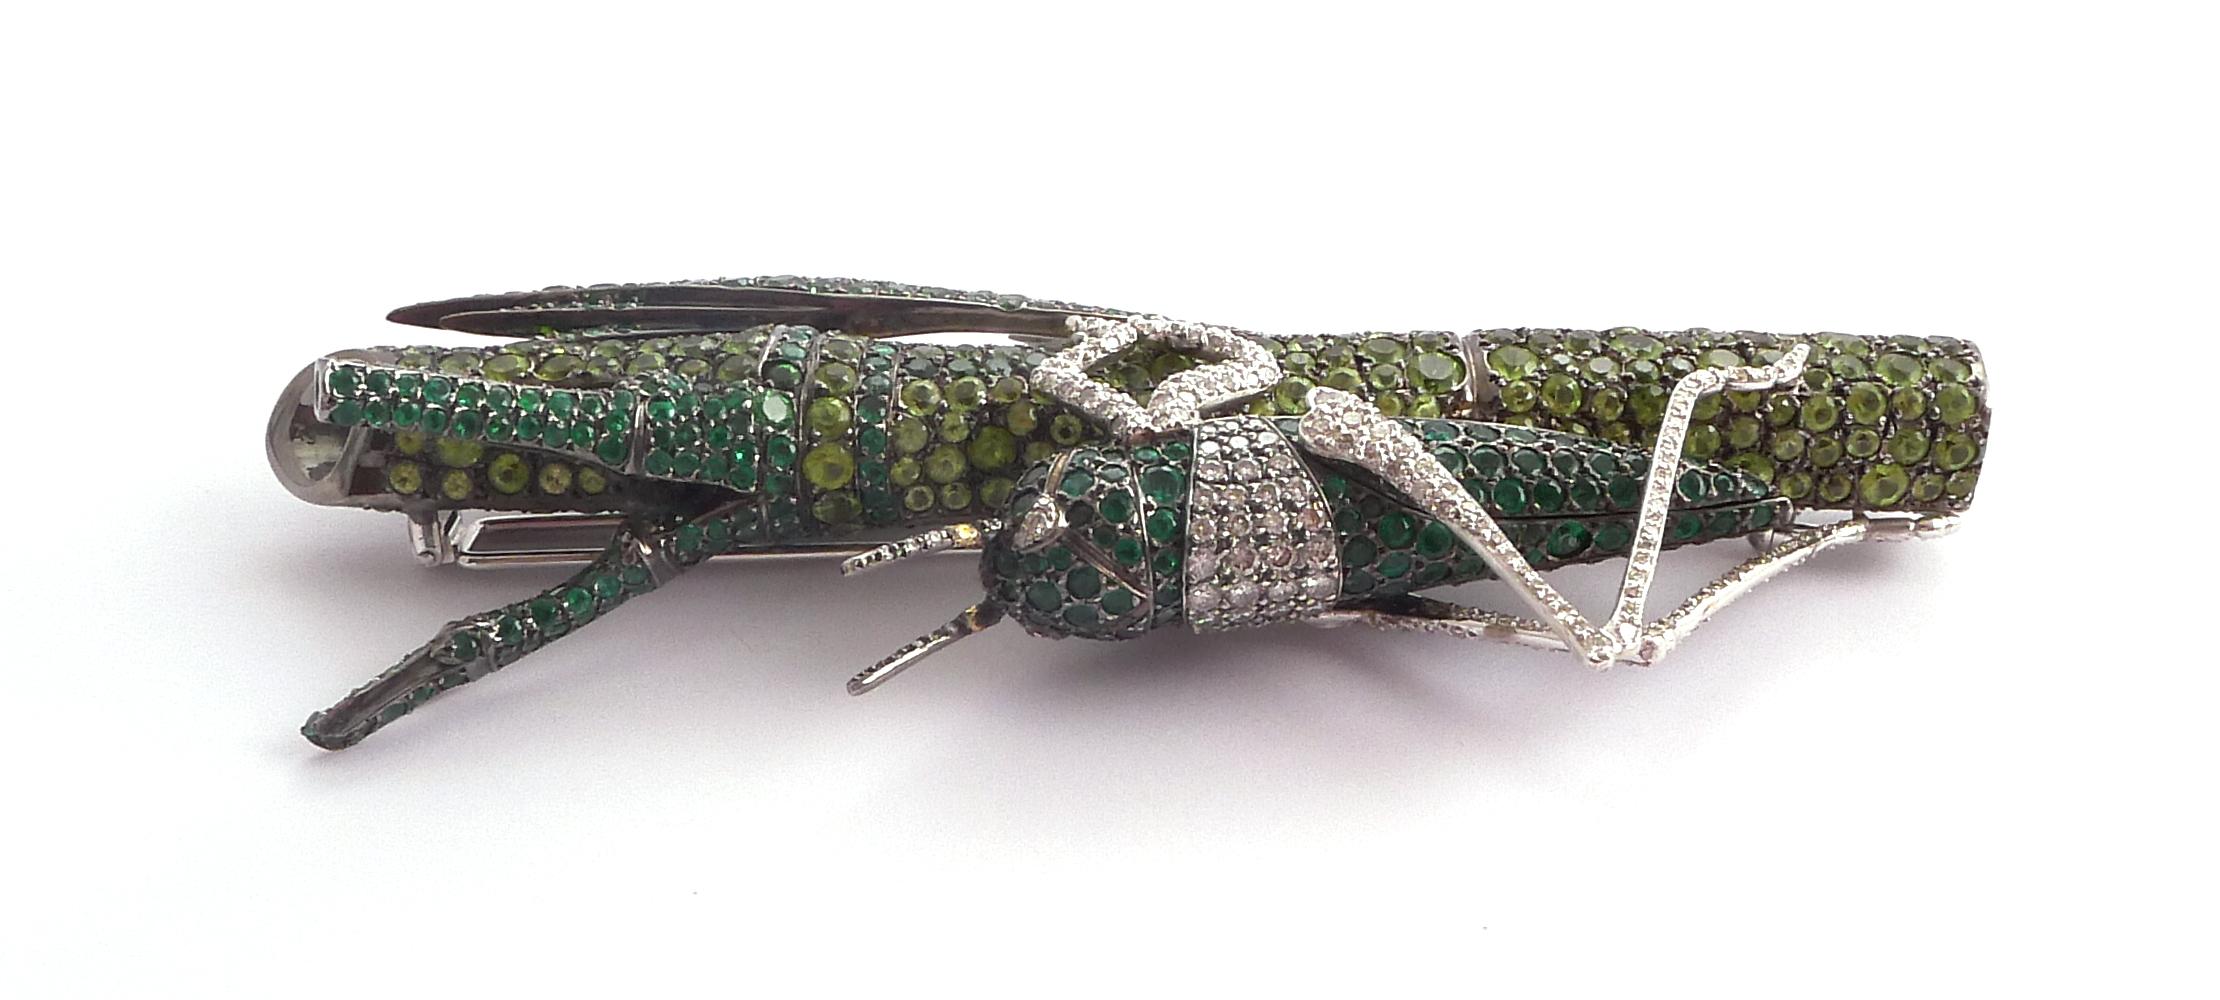 Modelled as a grasshopper on a bamboo cane with leaf, set throughout with round emeralds, tsavorite garnets, peridots and diamonds

Mounted in silver and 18K white gold

- 307 round emeralds: 7.02 ct total
- 372 round peridots: approximately 19.60